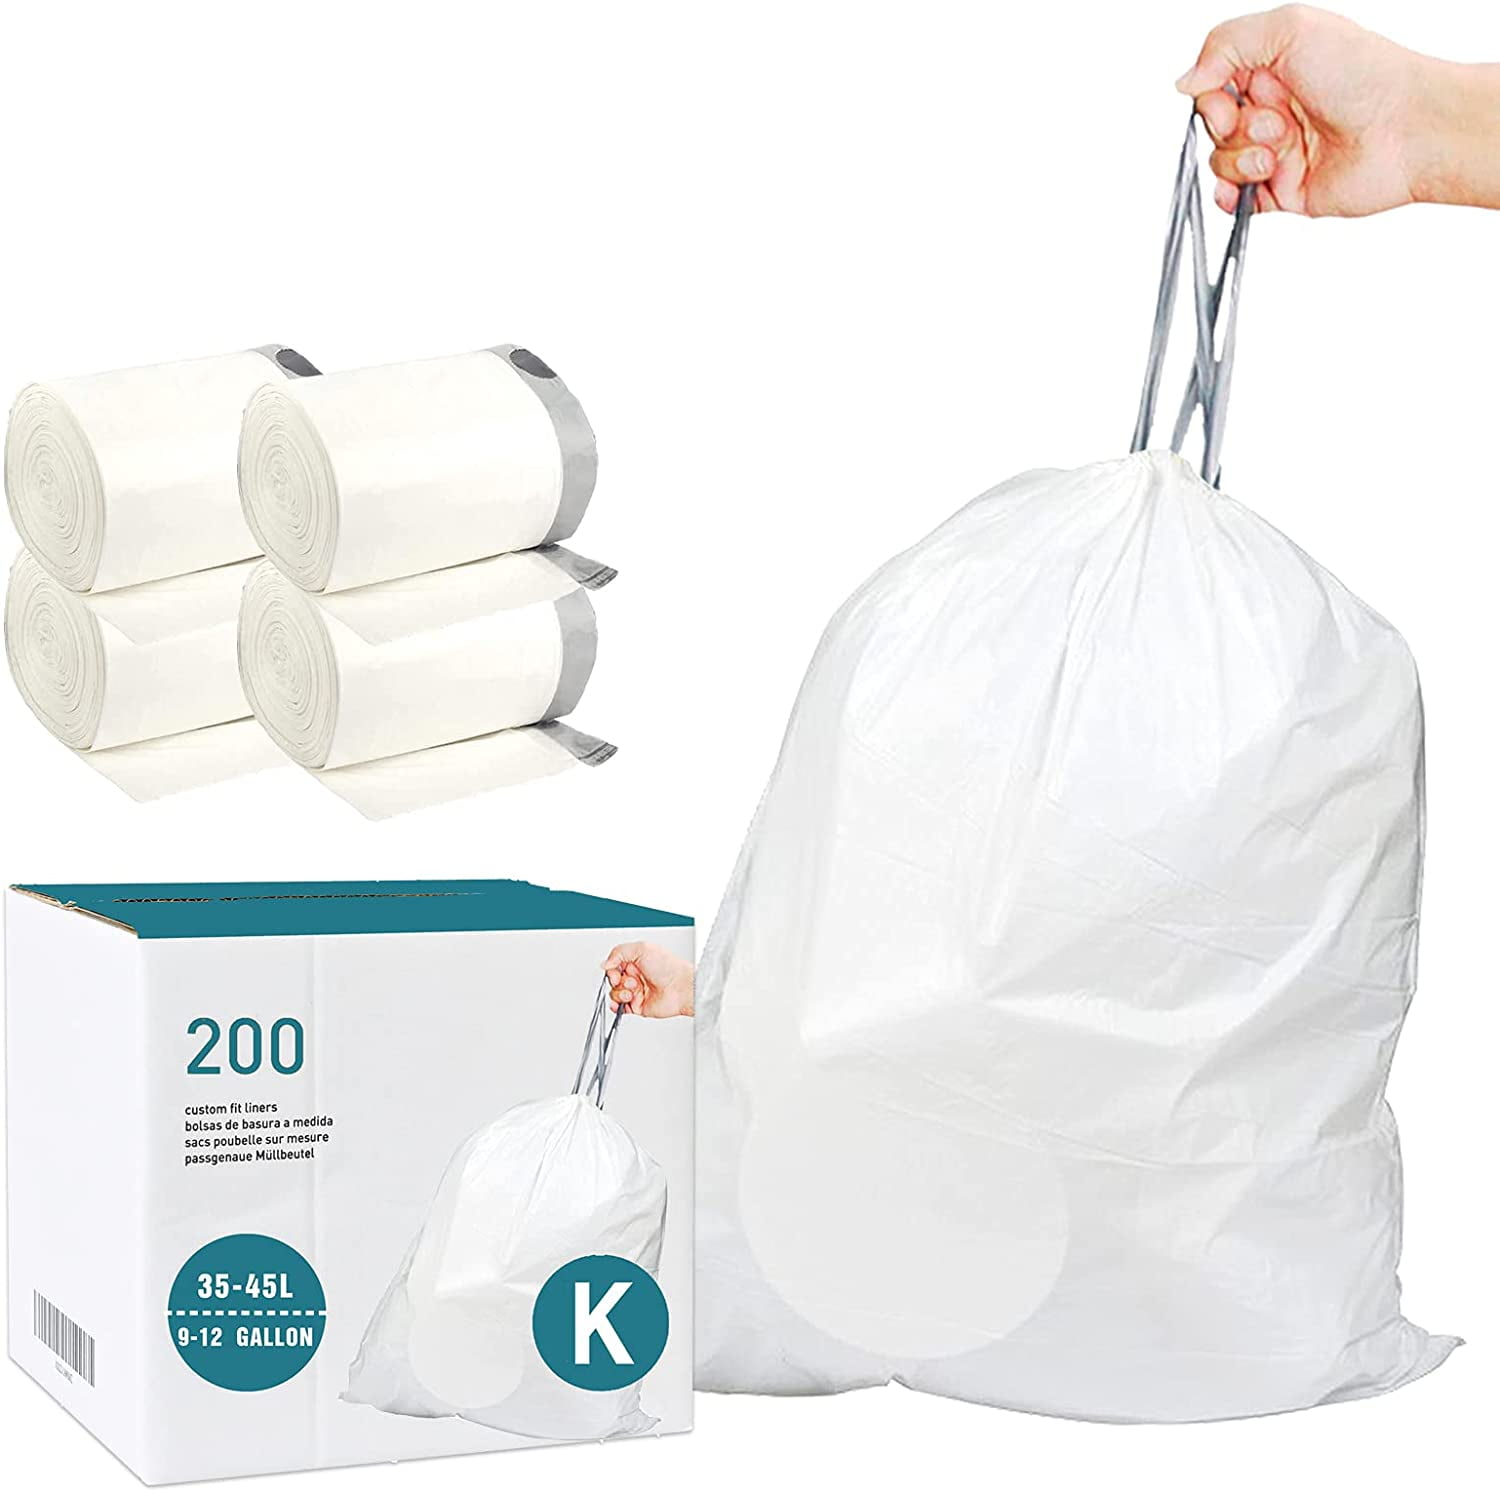  Reliable1st Code K Heavy Duty Trash Bags for 9-12 Gallon/35-45  Liter Drawstring, 1.2 Mil Heavy Duty (50 Count)